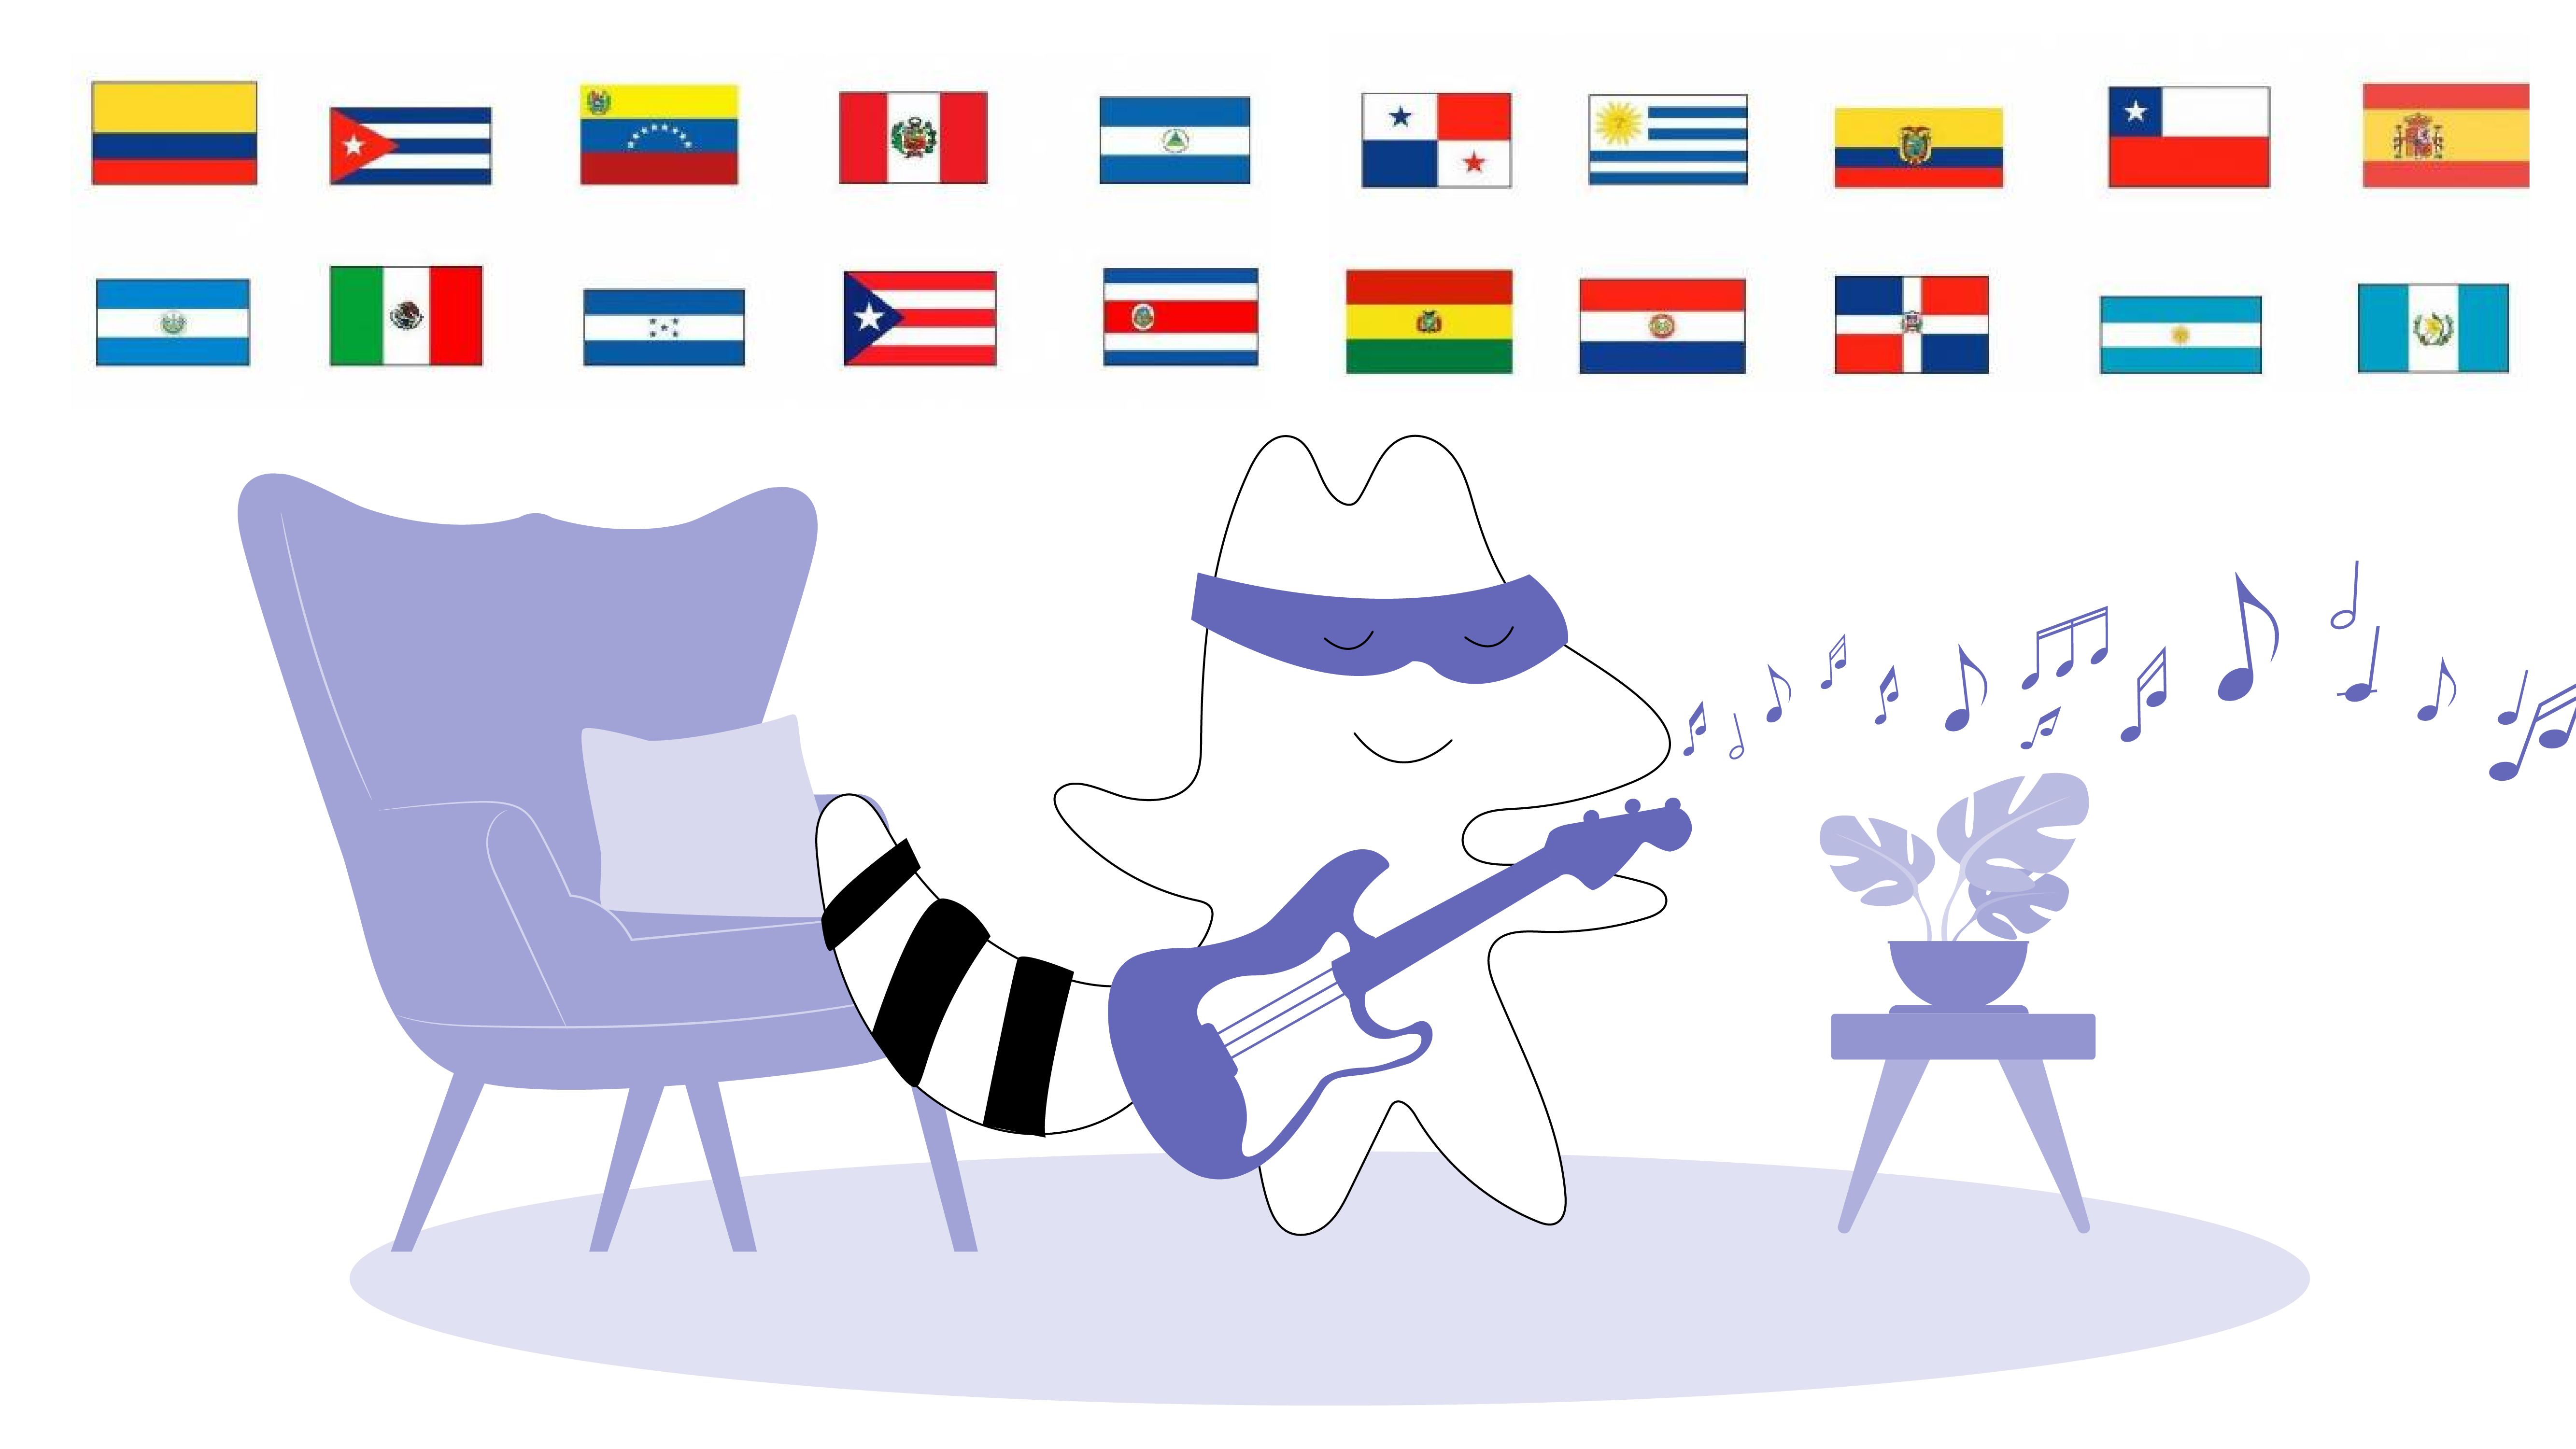 Benji holding a guitar while singing, with the flags of Spanish-speaking countries in the background.